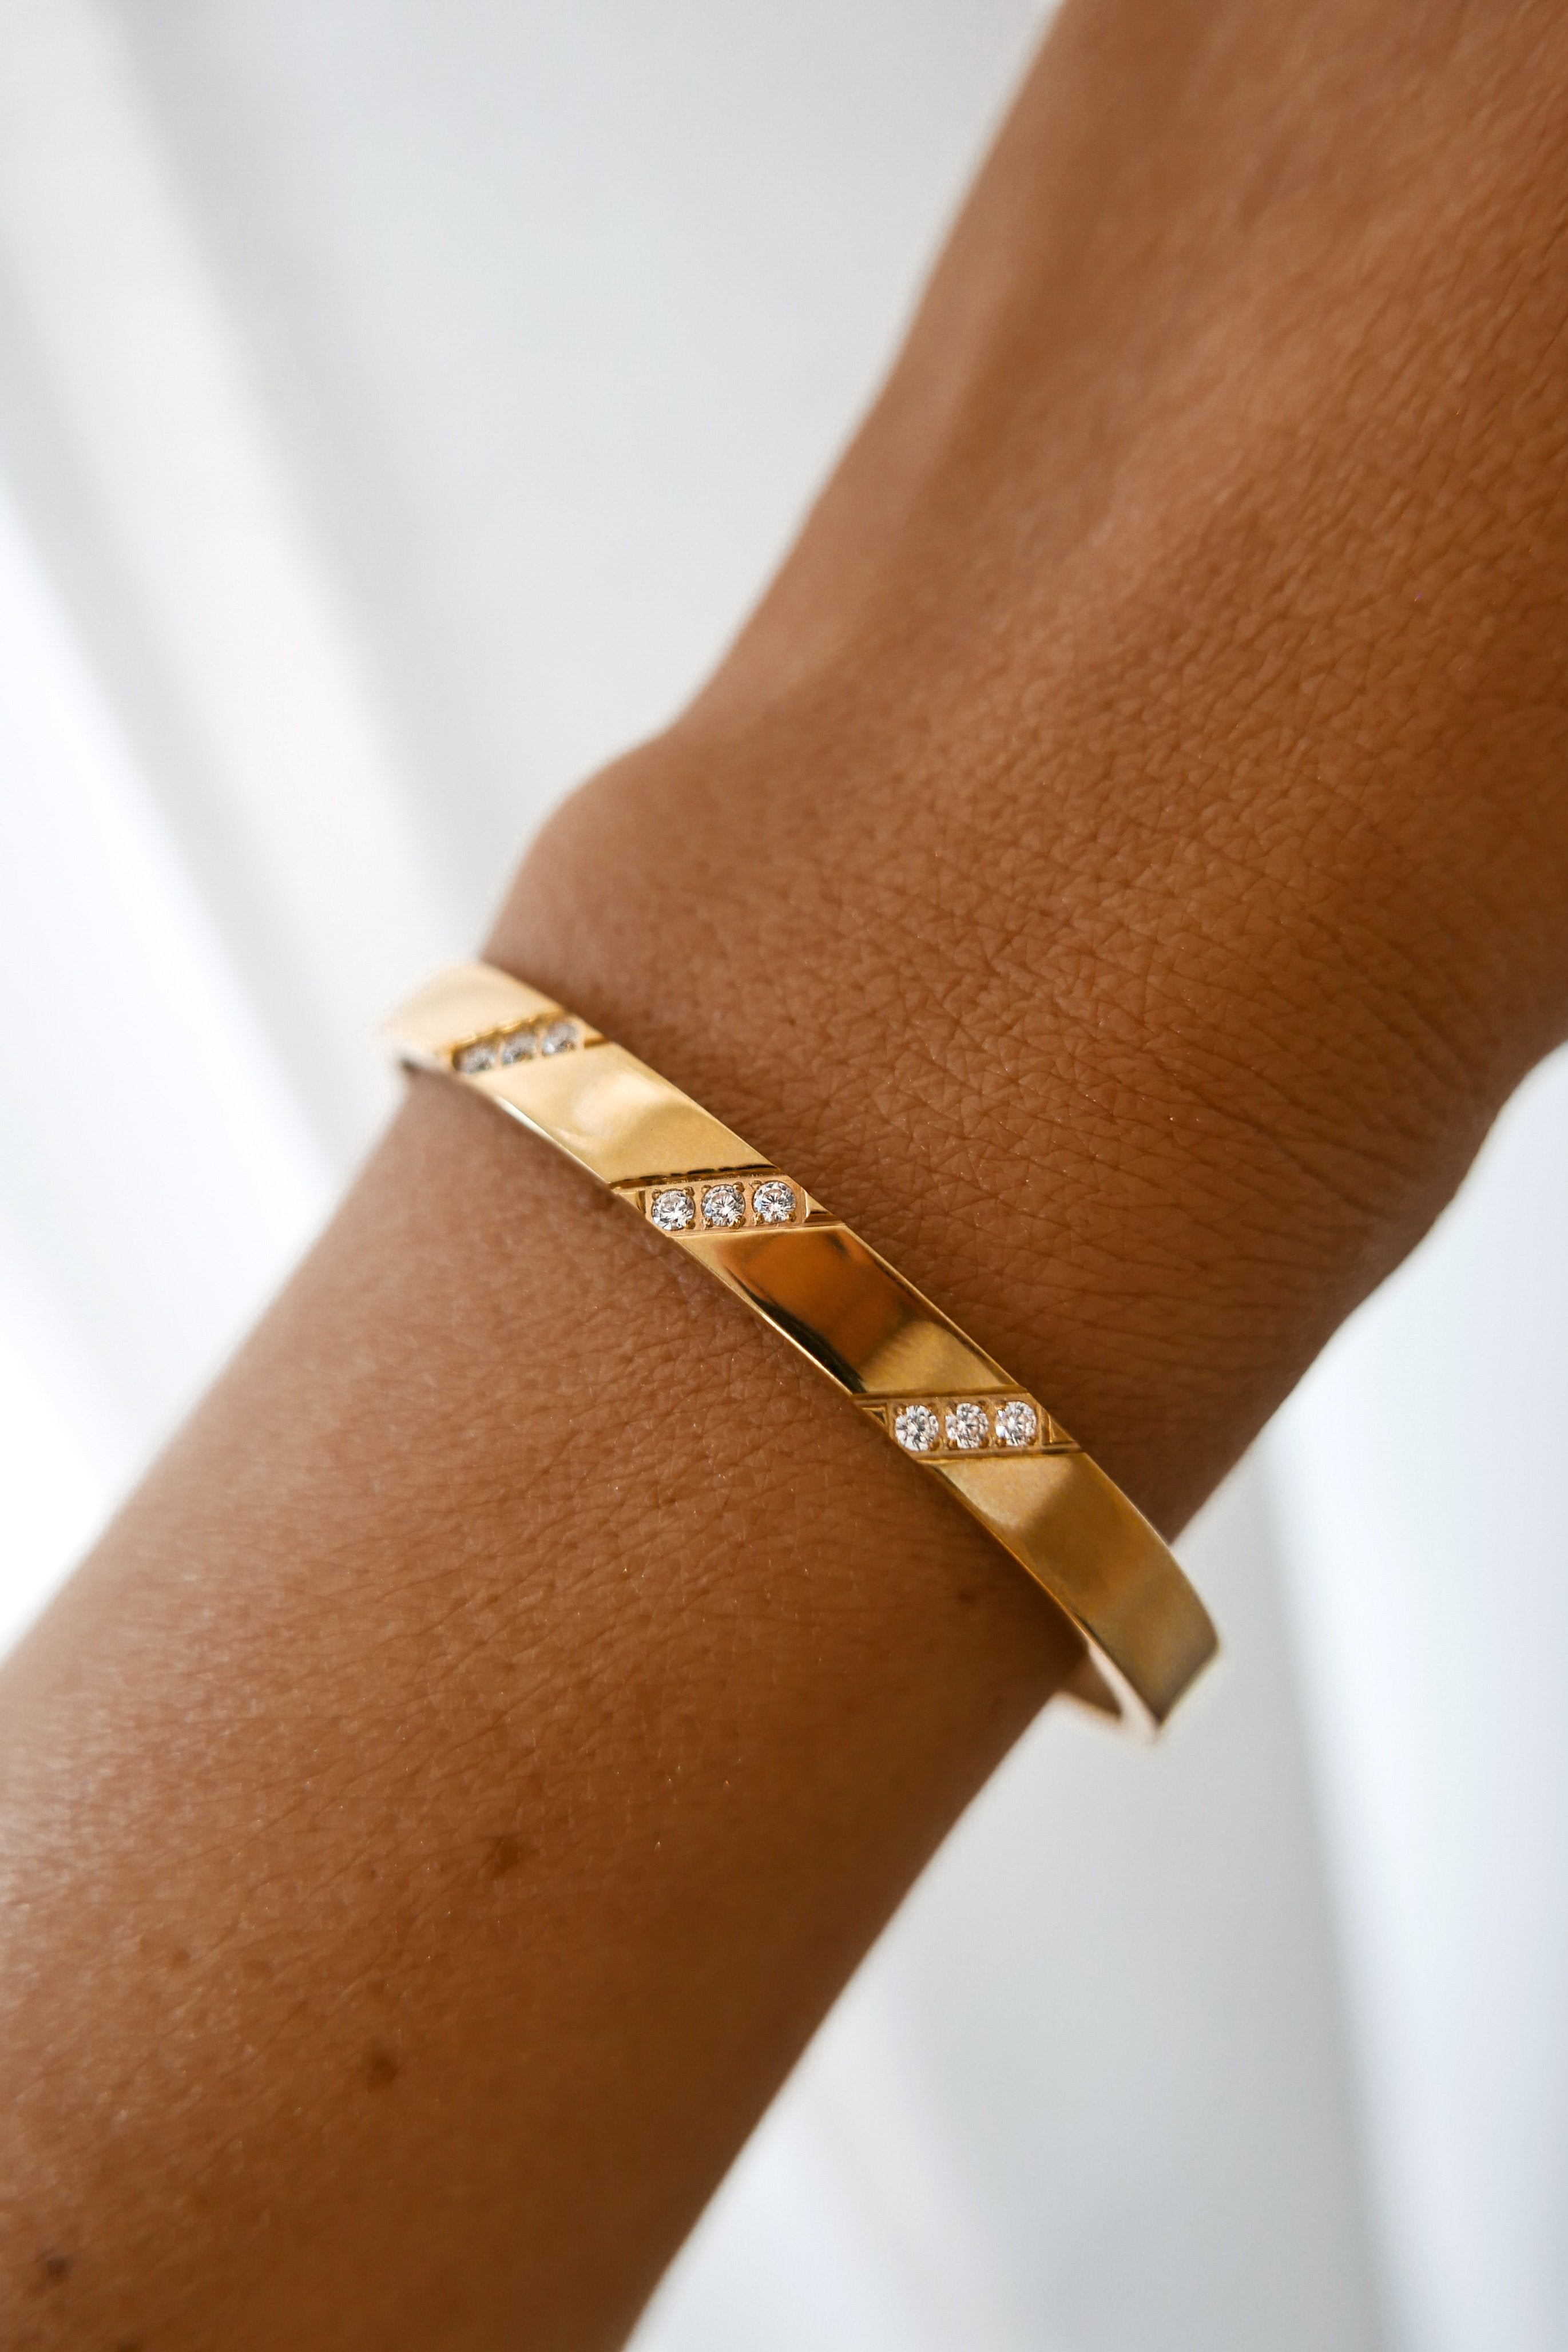 Britney Cuff - Boutique Minimaliste has waterproof, durable, elegant and vintage inspired jewelry